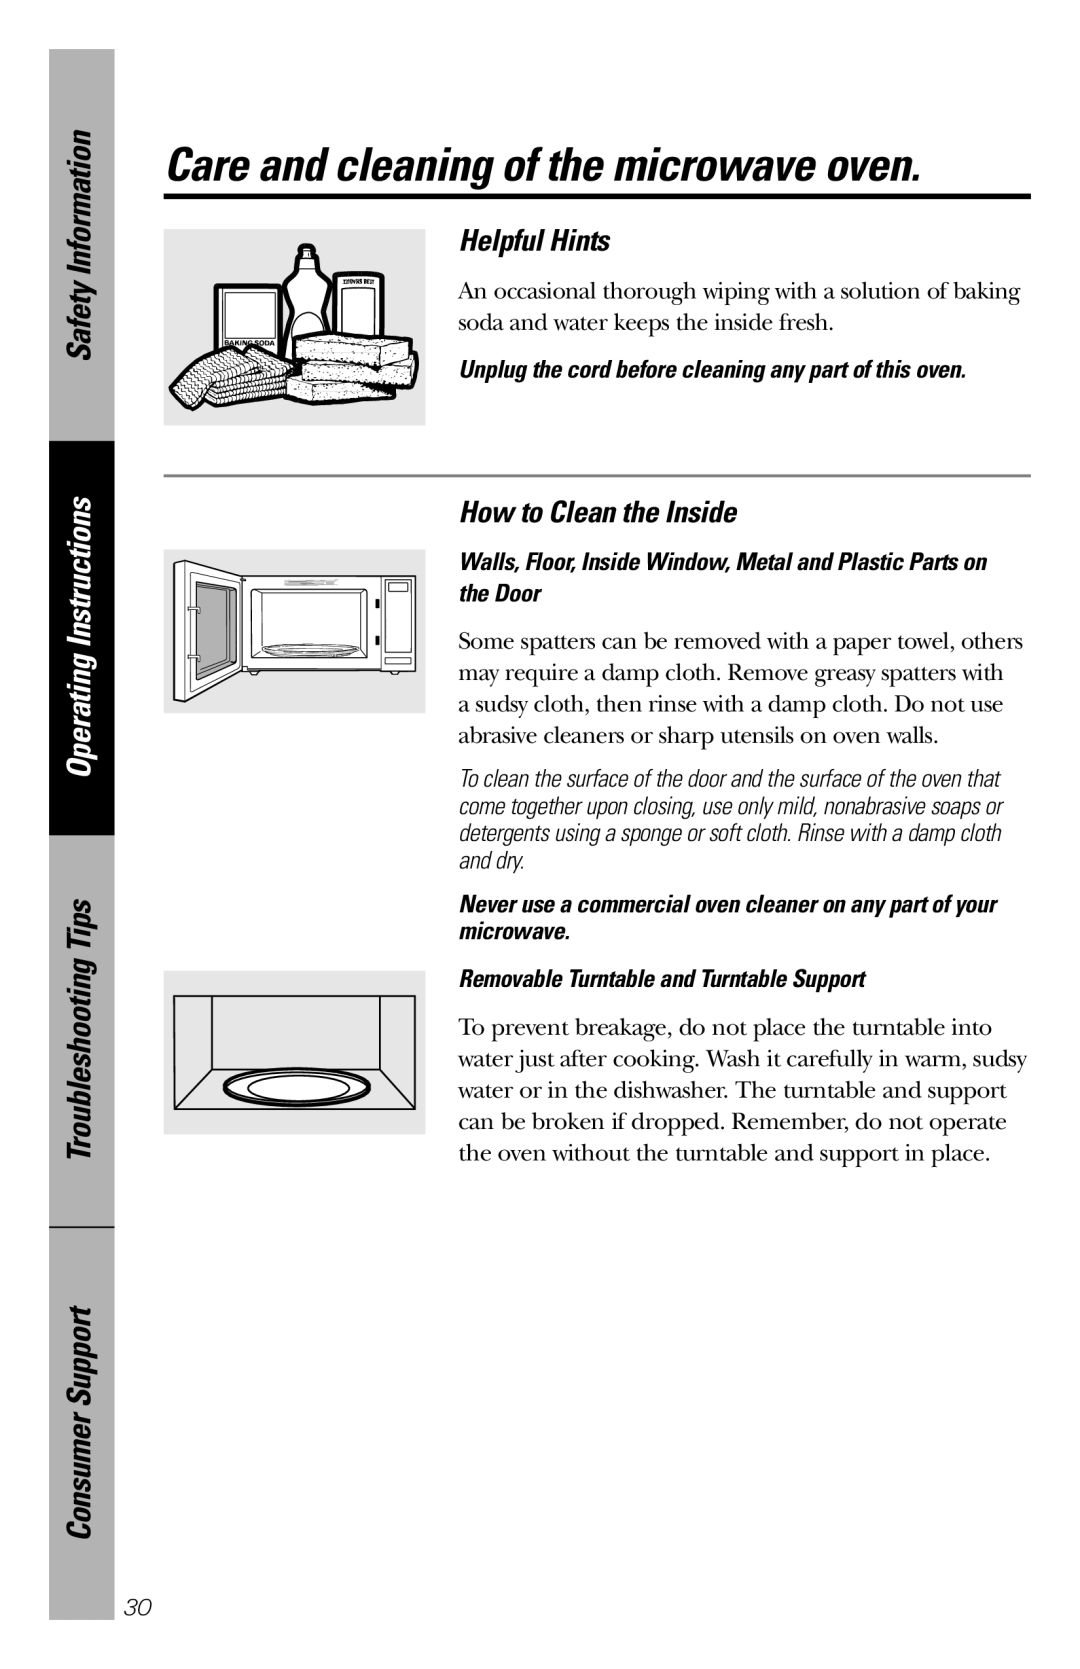 GE JES1358 owner manual Helpful Hints, How to Clean the Inside, Care and cleaning of the microwave oven, Safety Information 